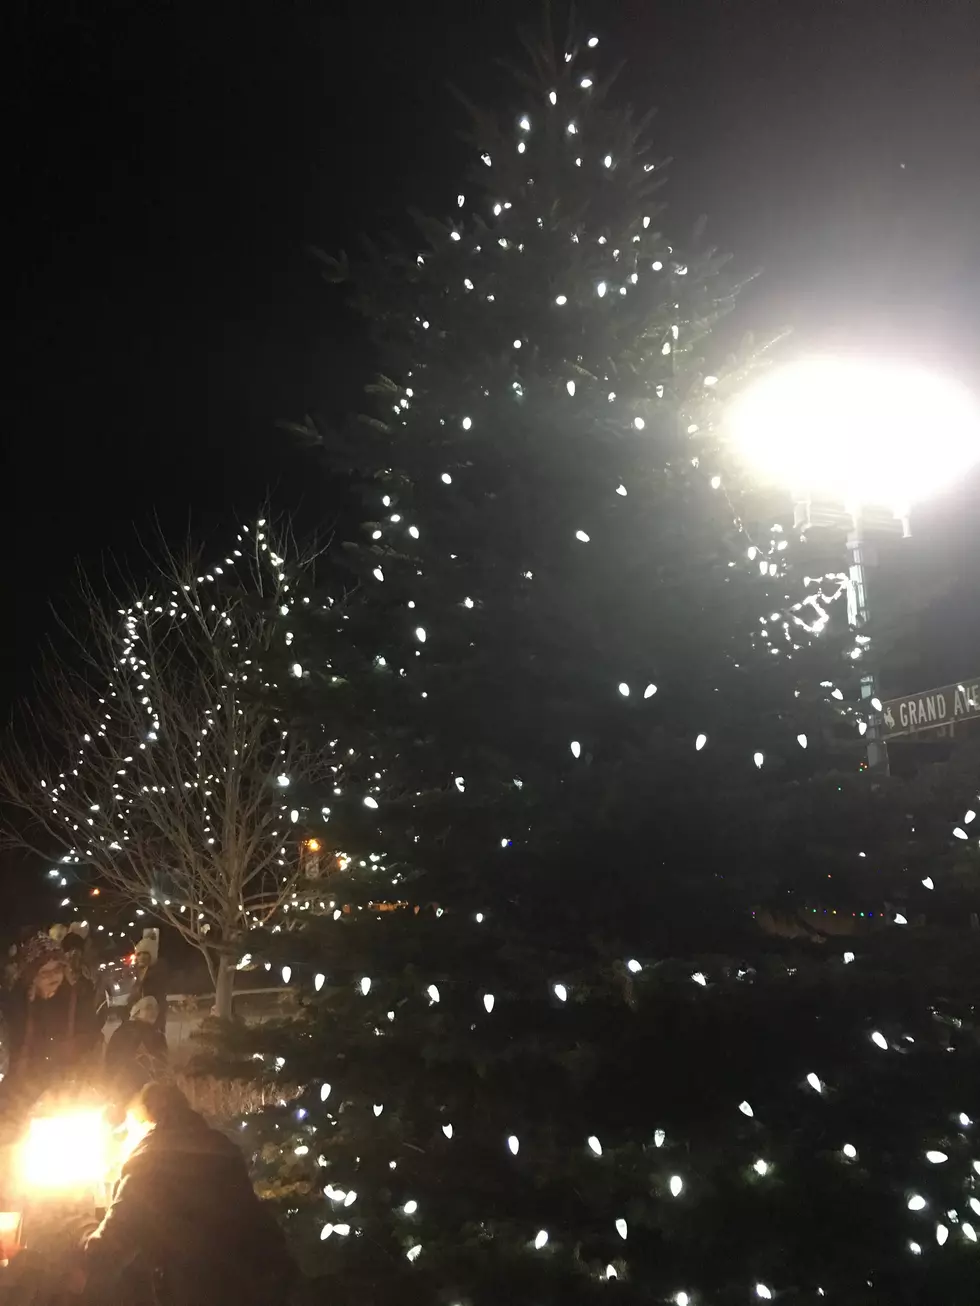 The Best Christmas Lights in Laramie [POLL]